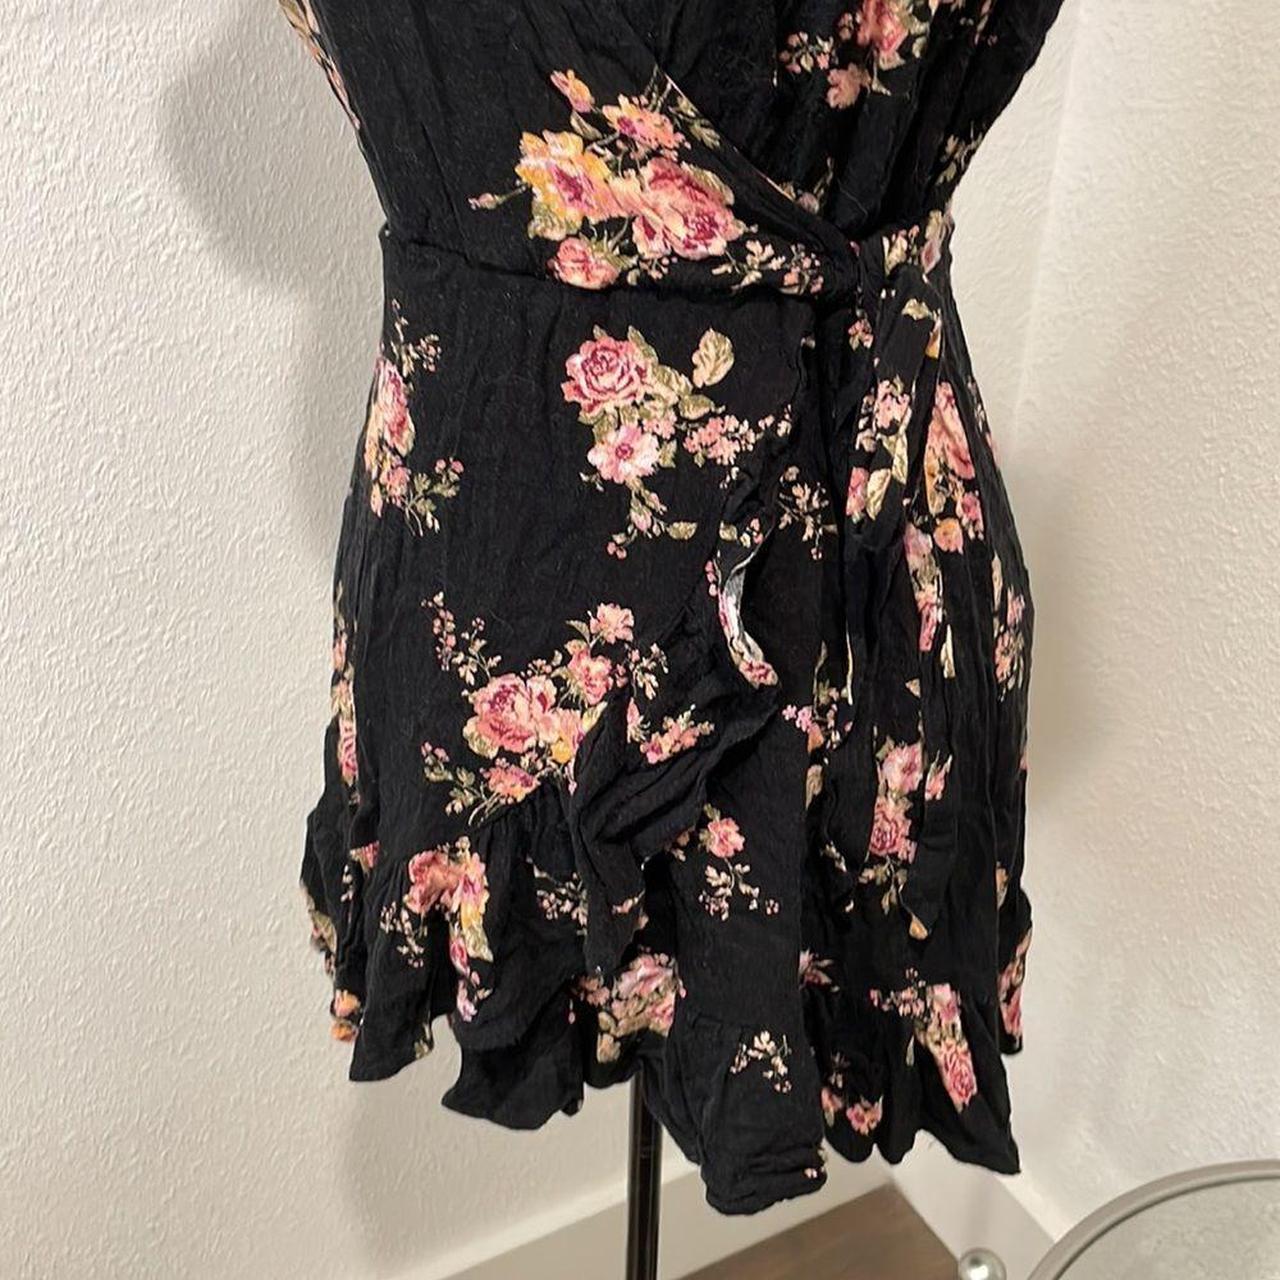 The Look for Less: Heartloom Floral Dresses As Seen On Victoria's Secret  Angels - The Budget Babe